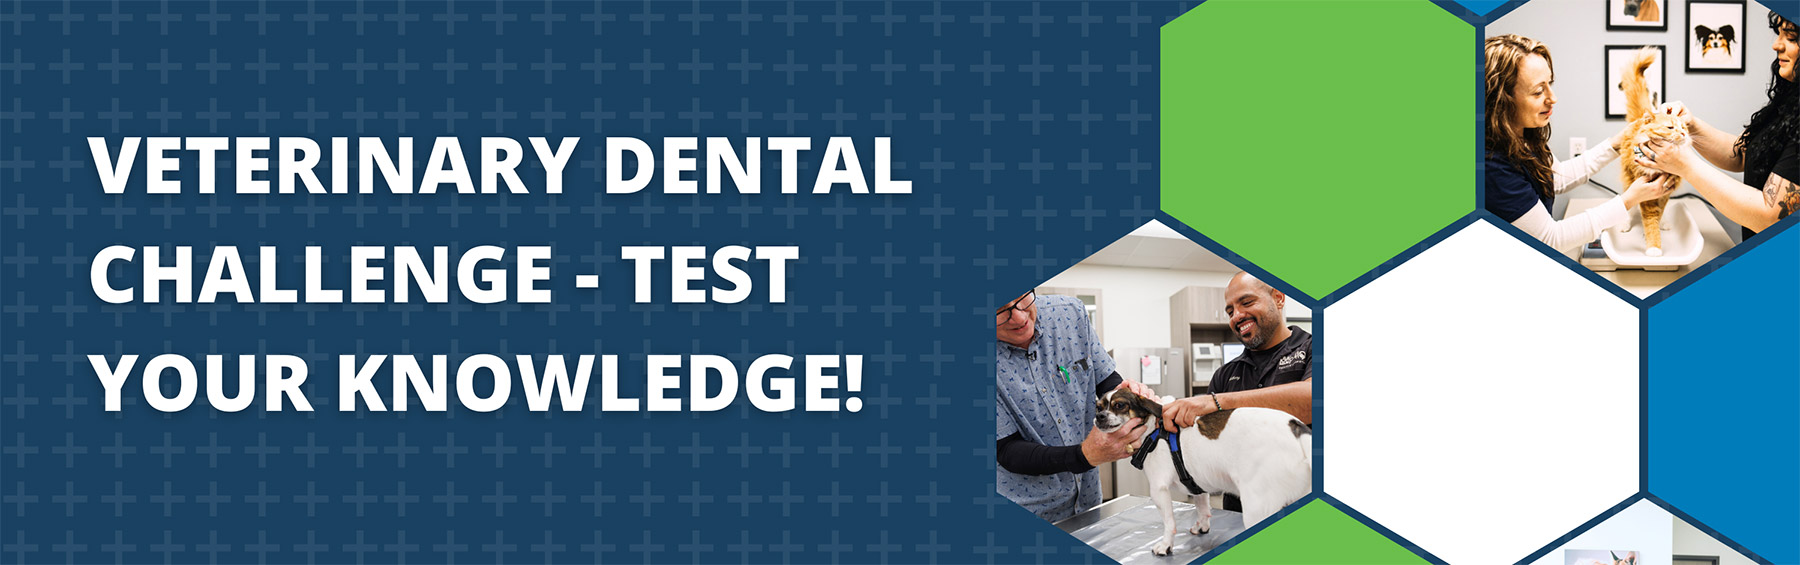 Veterinary Dental Challenge - Test Your Knowledge!